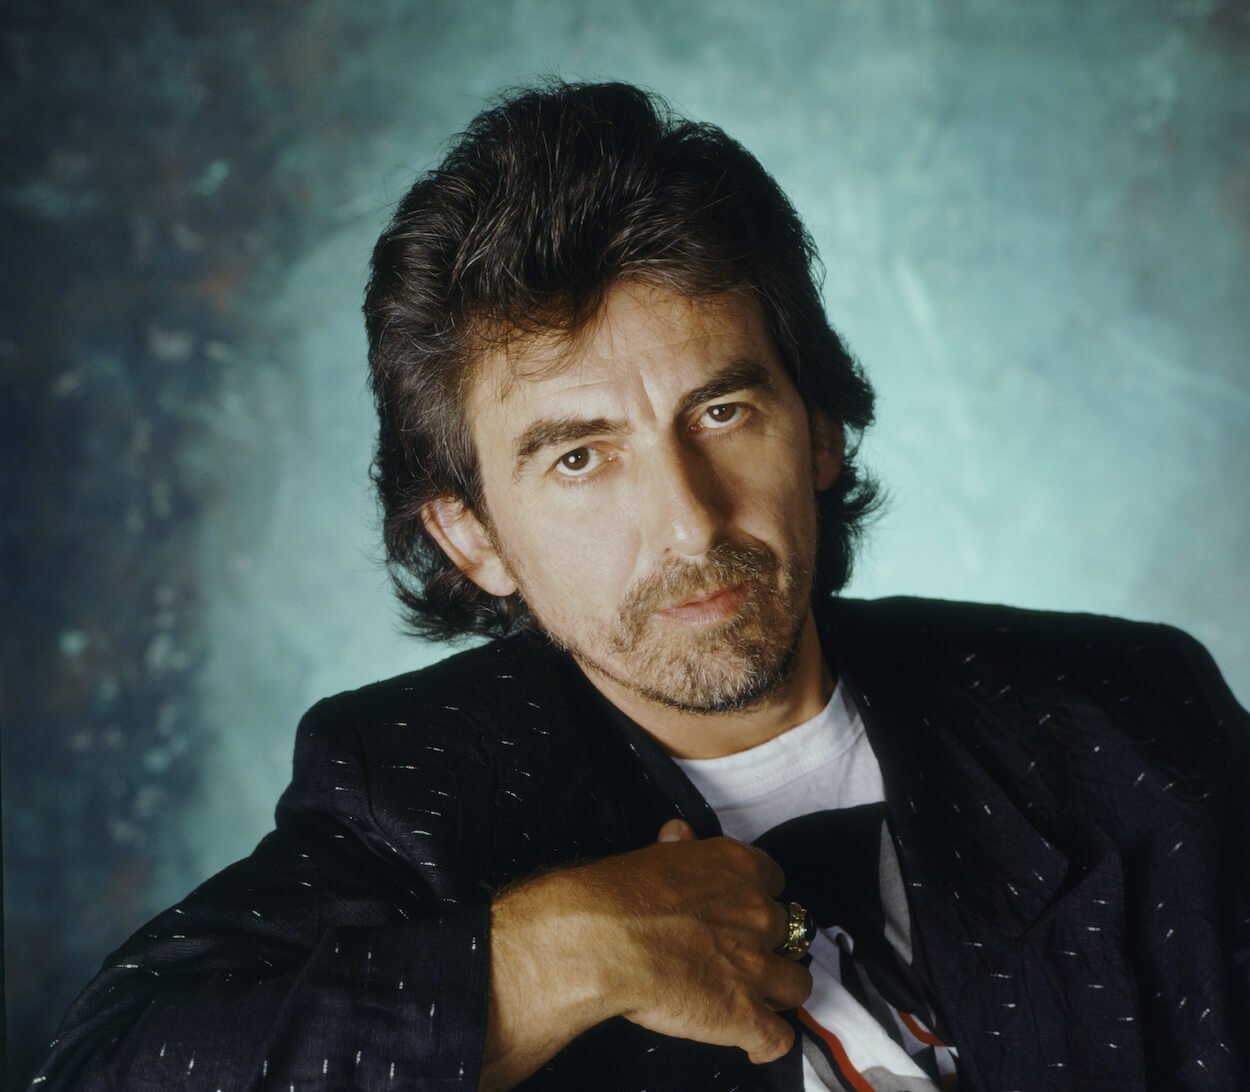 George Harrison sports a light beard and wears a dark suit jacket while posing for a portrait.